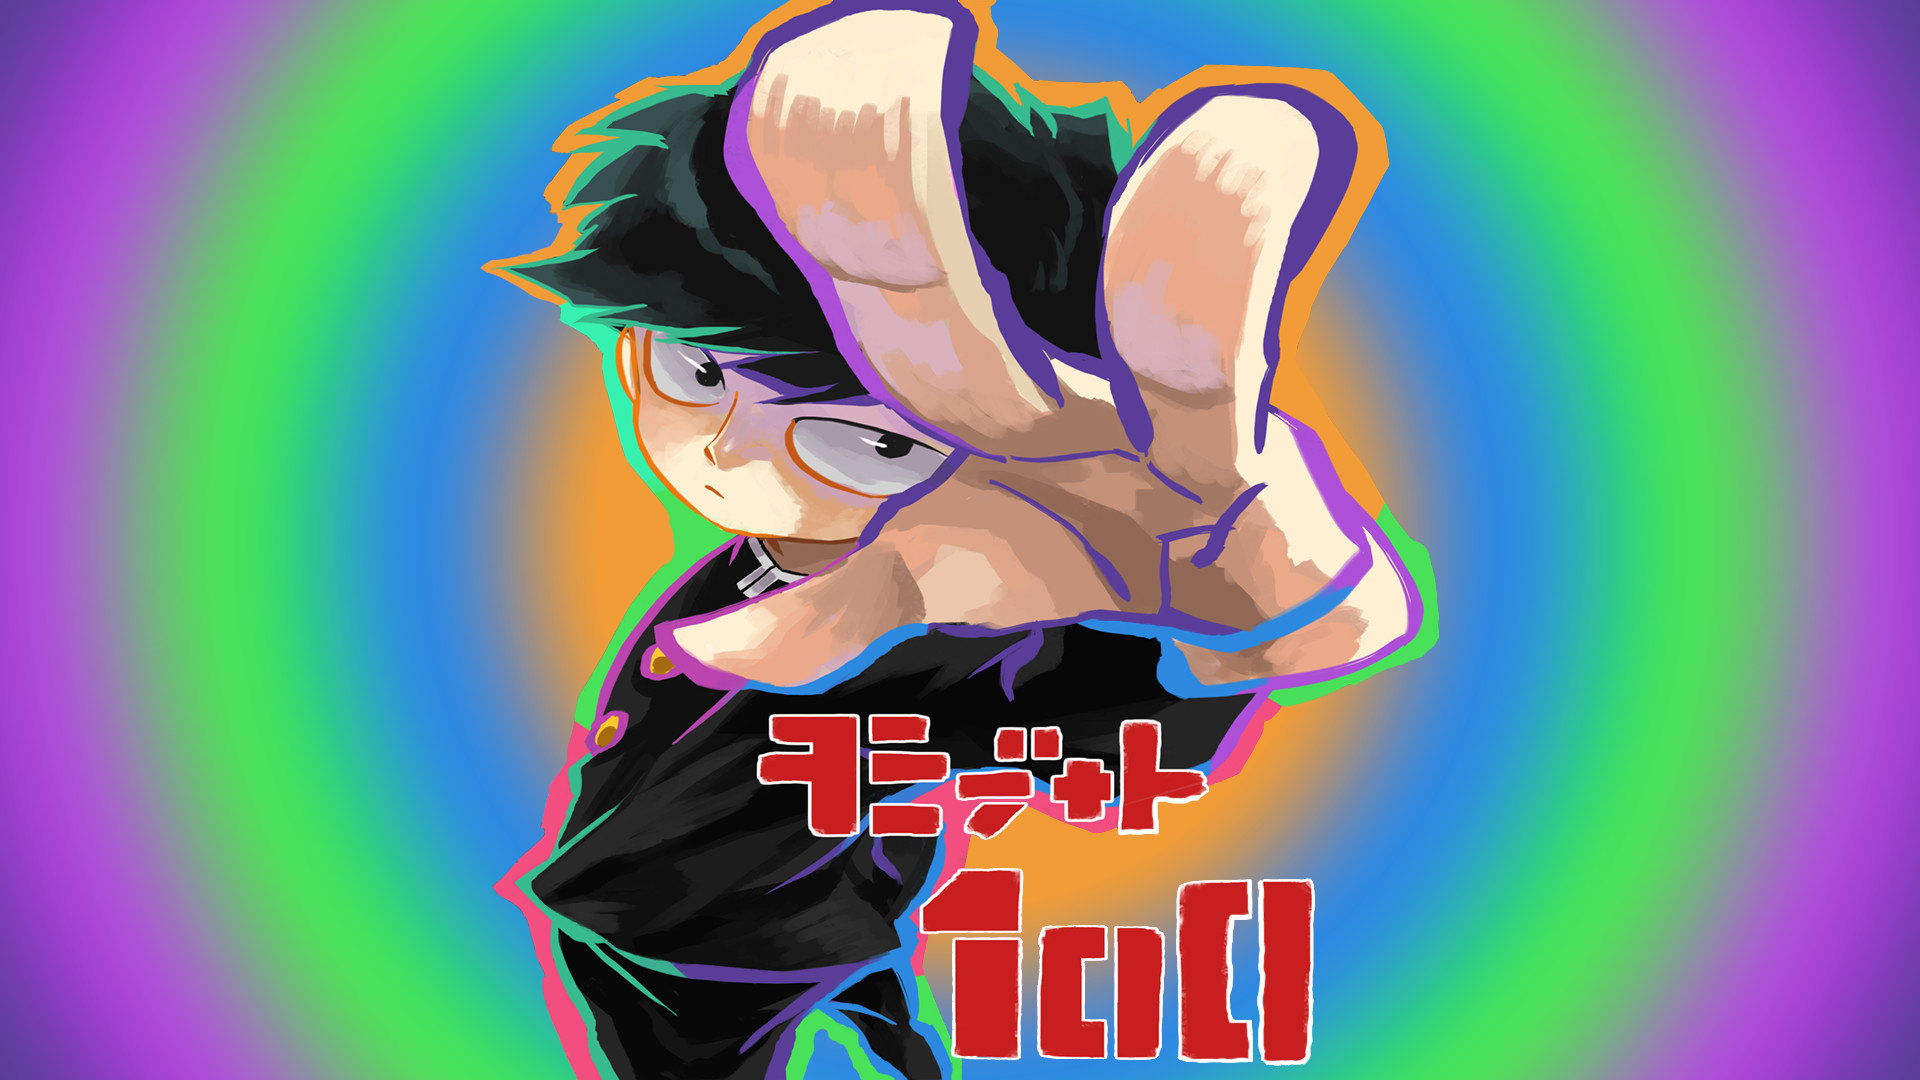 Awesome Mob Psycho 100 free wallpaper ID:329047 for hd 1920x1080 desktop